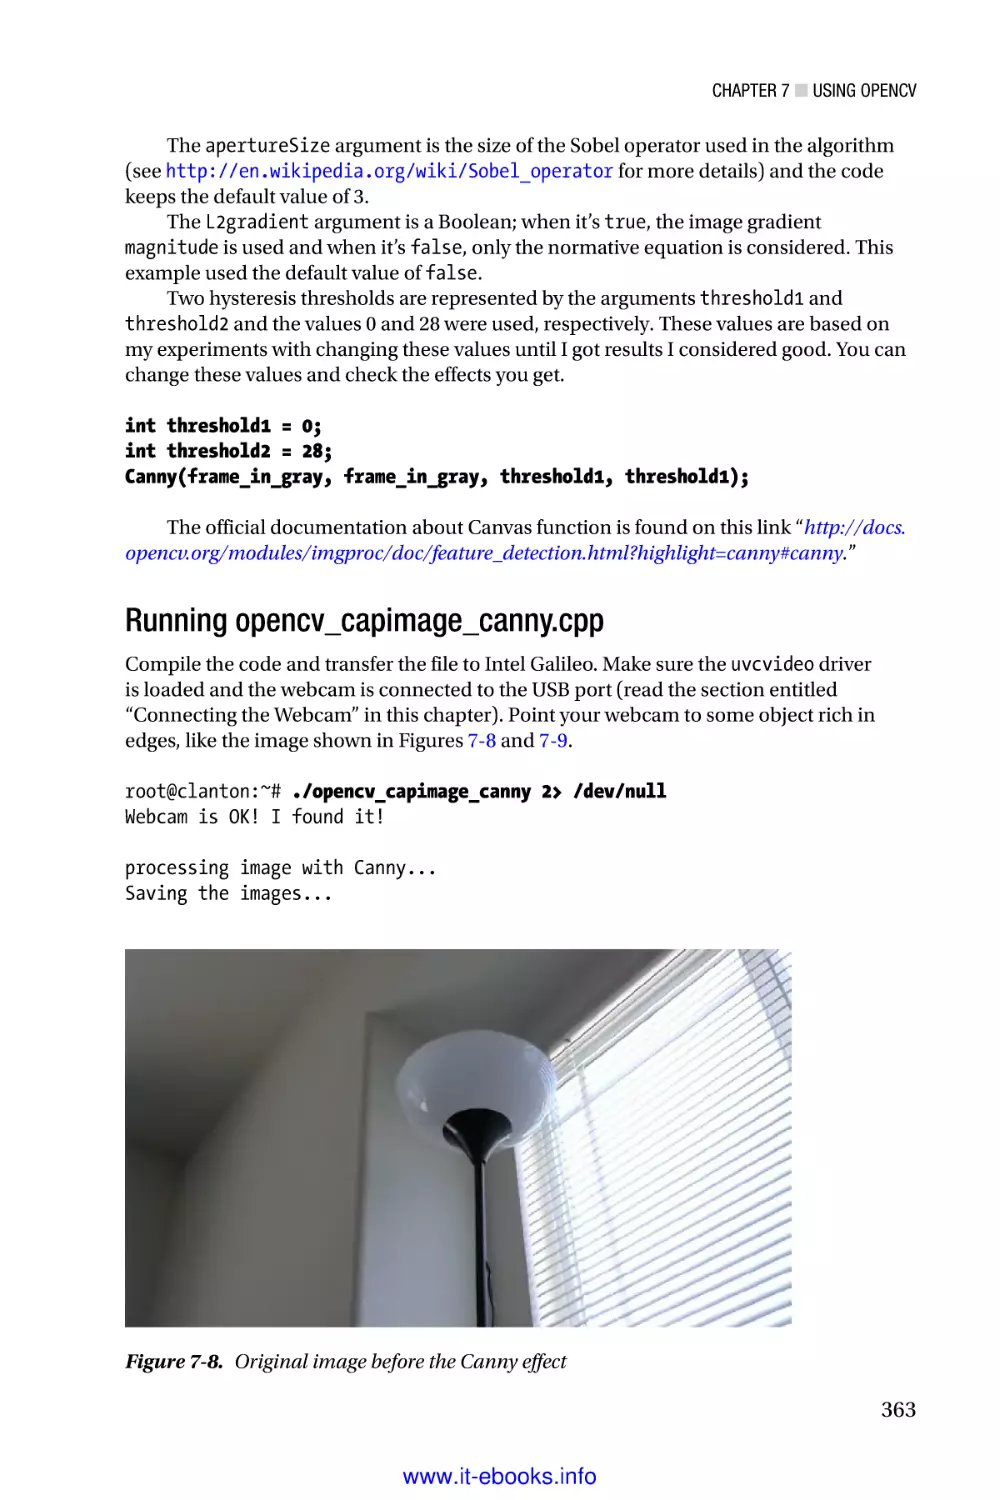 Running opencv_capimage_canny.cpp